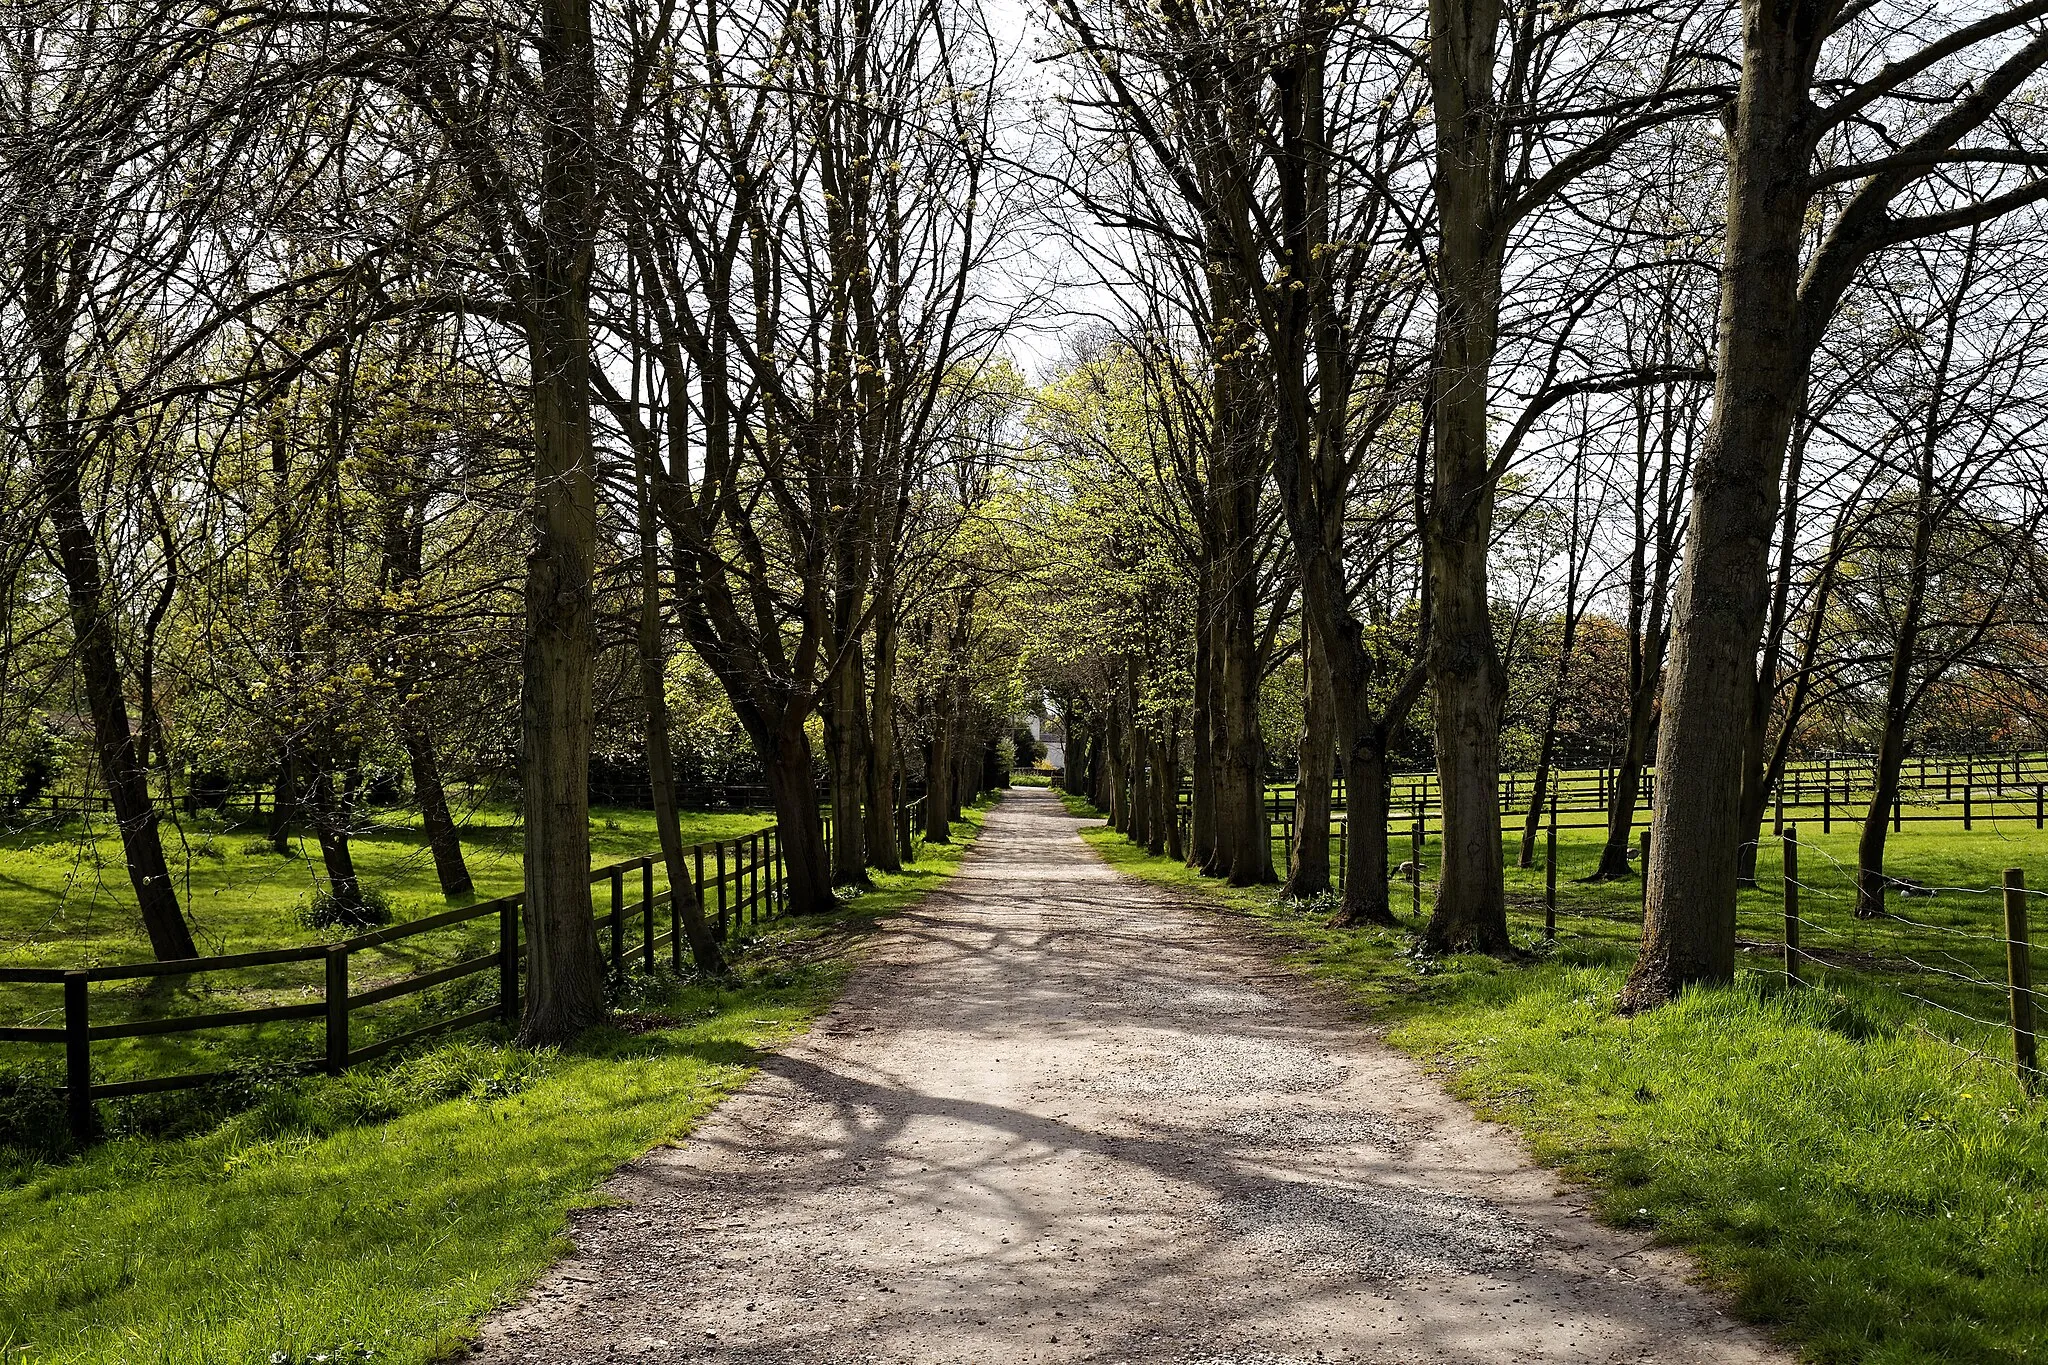 Photo showing: An avenue of trees to the west and on a driveway road leading from St Mary Magdalen Church at Magdalen Laver, Essex, England. Camera: Canon EOS 6D with Canon EF 24-105mm F4L IS USM lens. Software: large RAW file lens-corrected, optimized and downsized with DxO OpticsPro 10 Elite, Viewpoint 2, and Adobe Photoshop CS2.